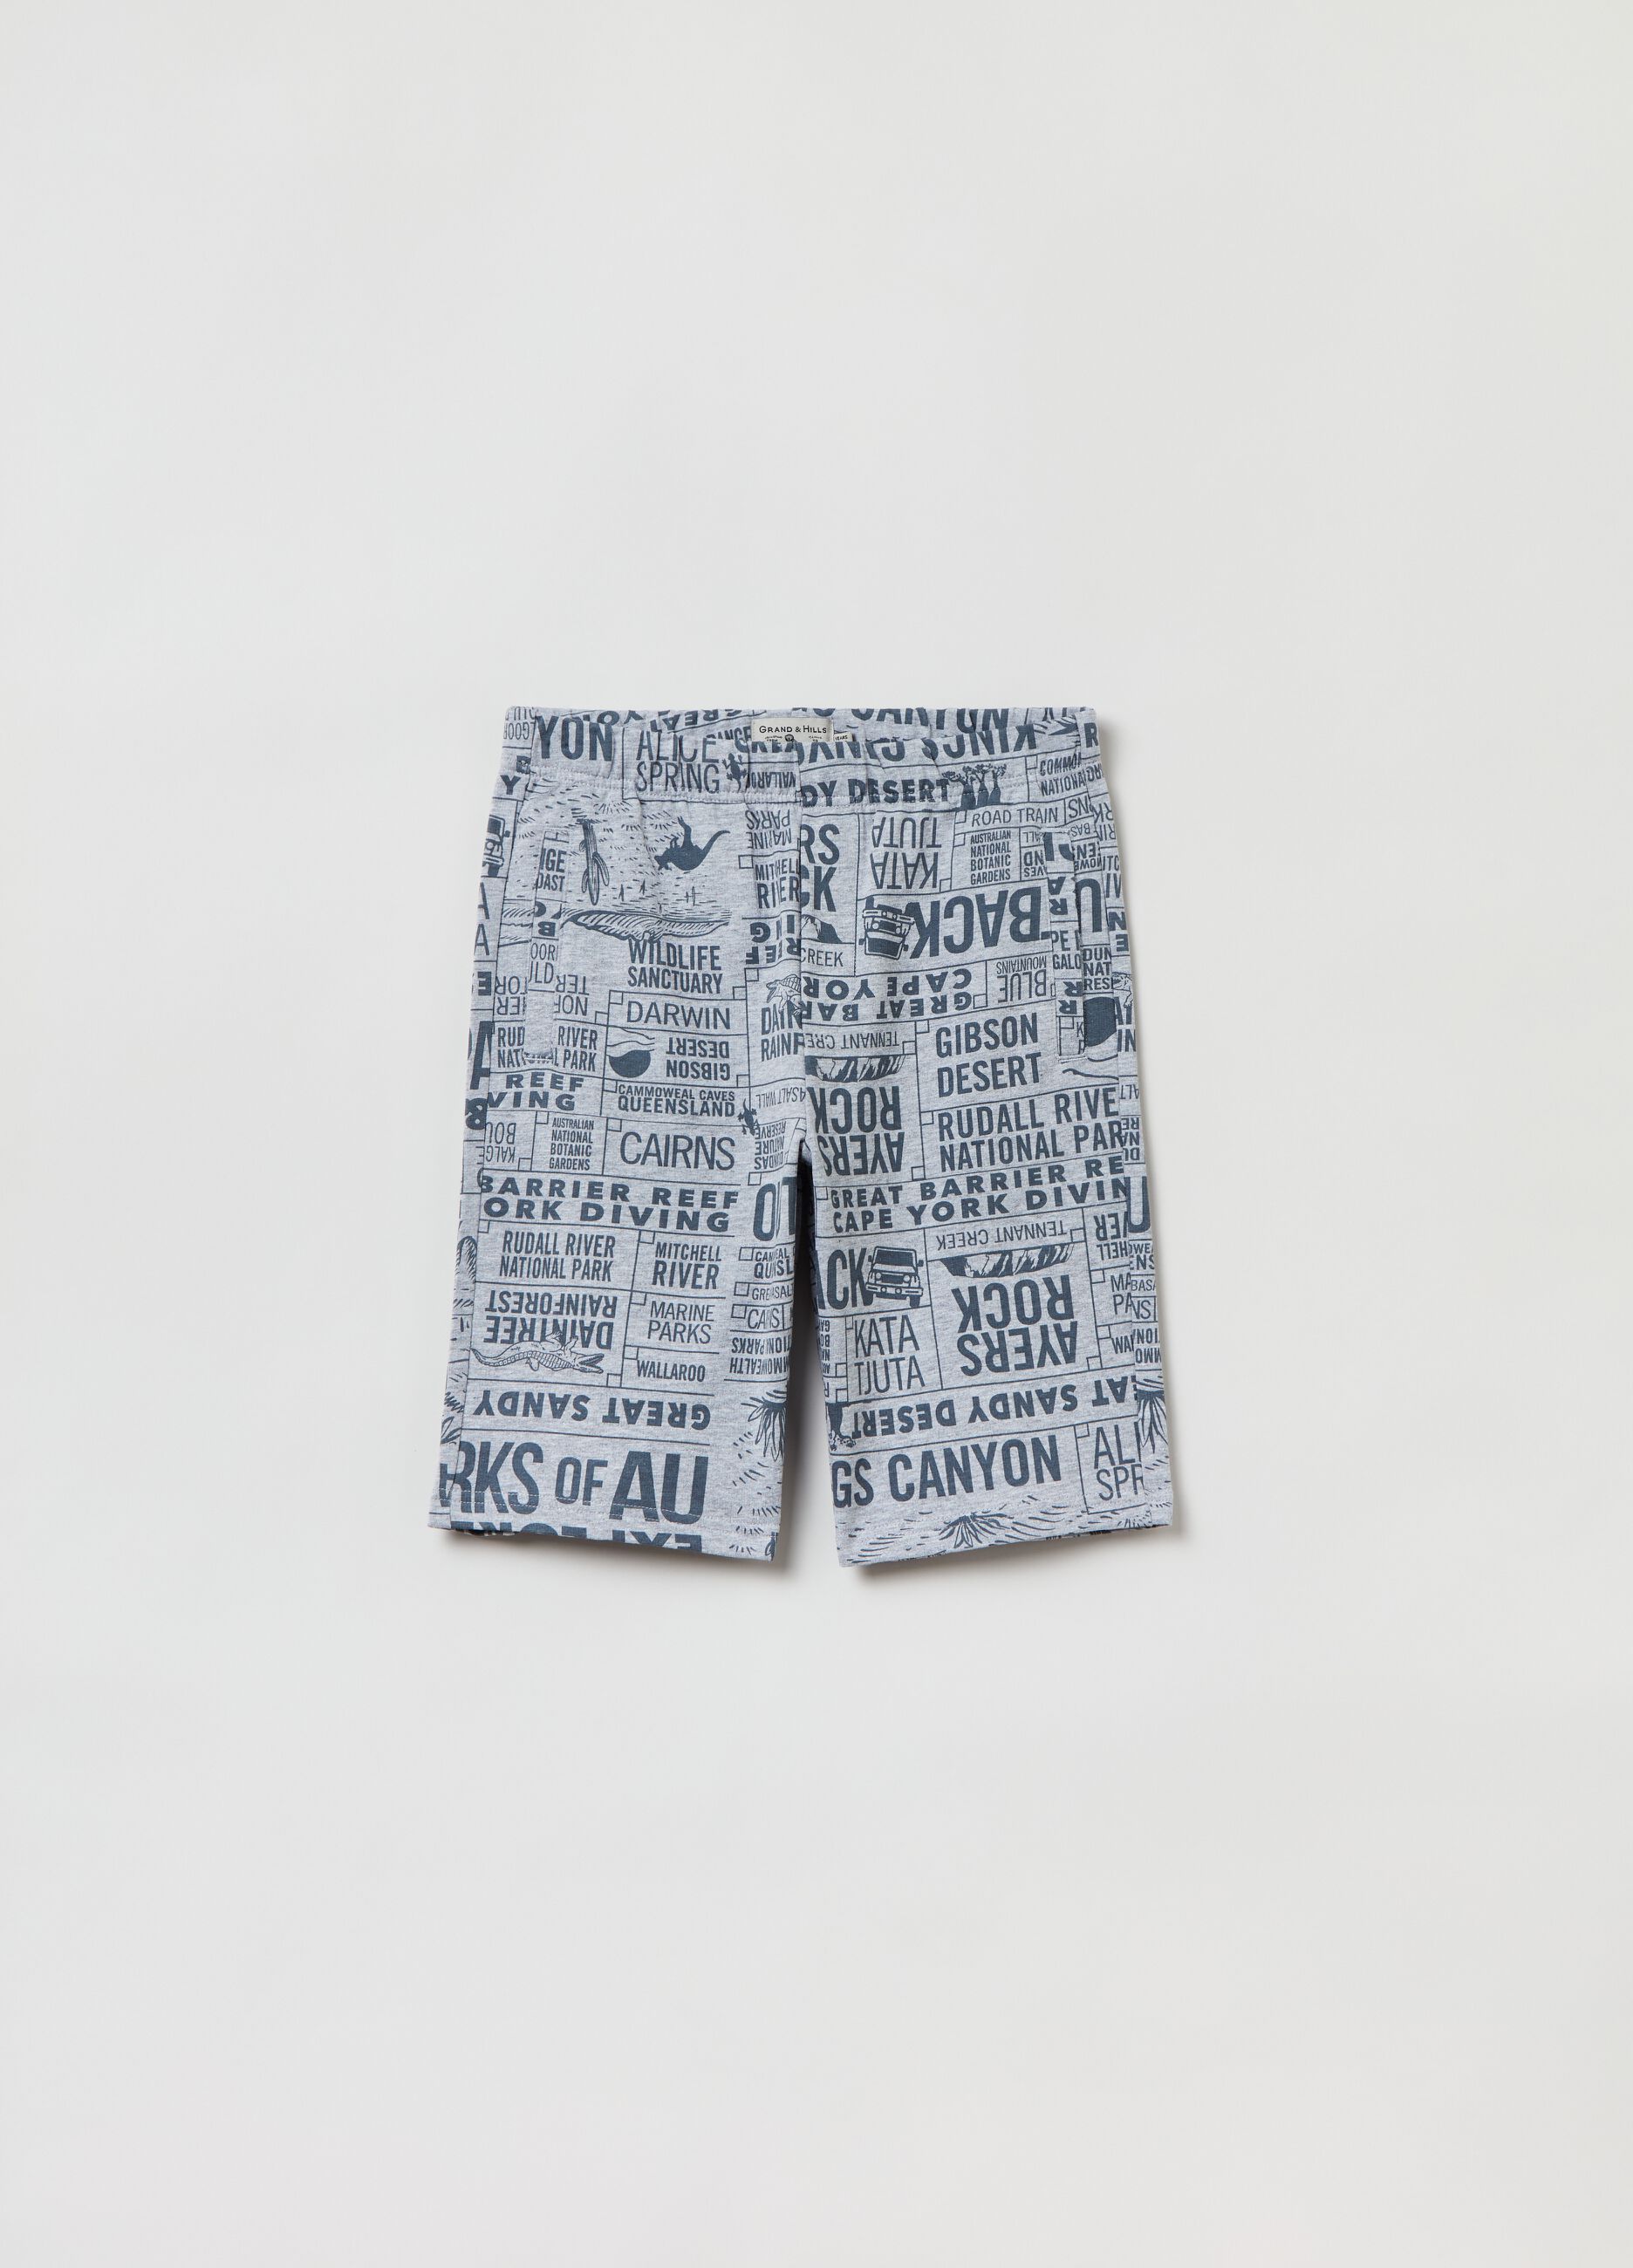 Grand&Hills cotton shorts with print